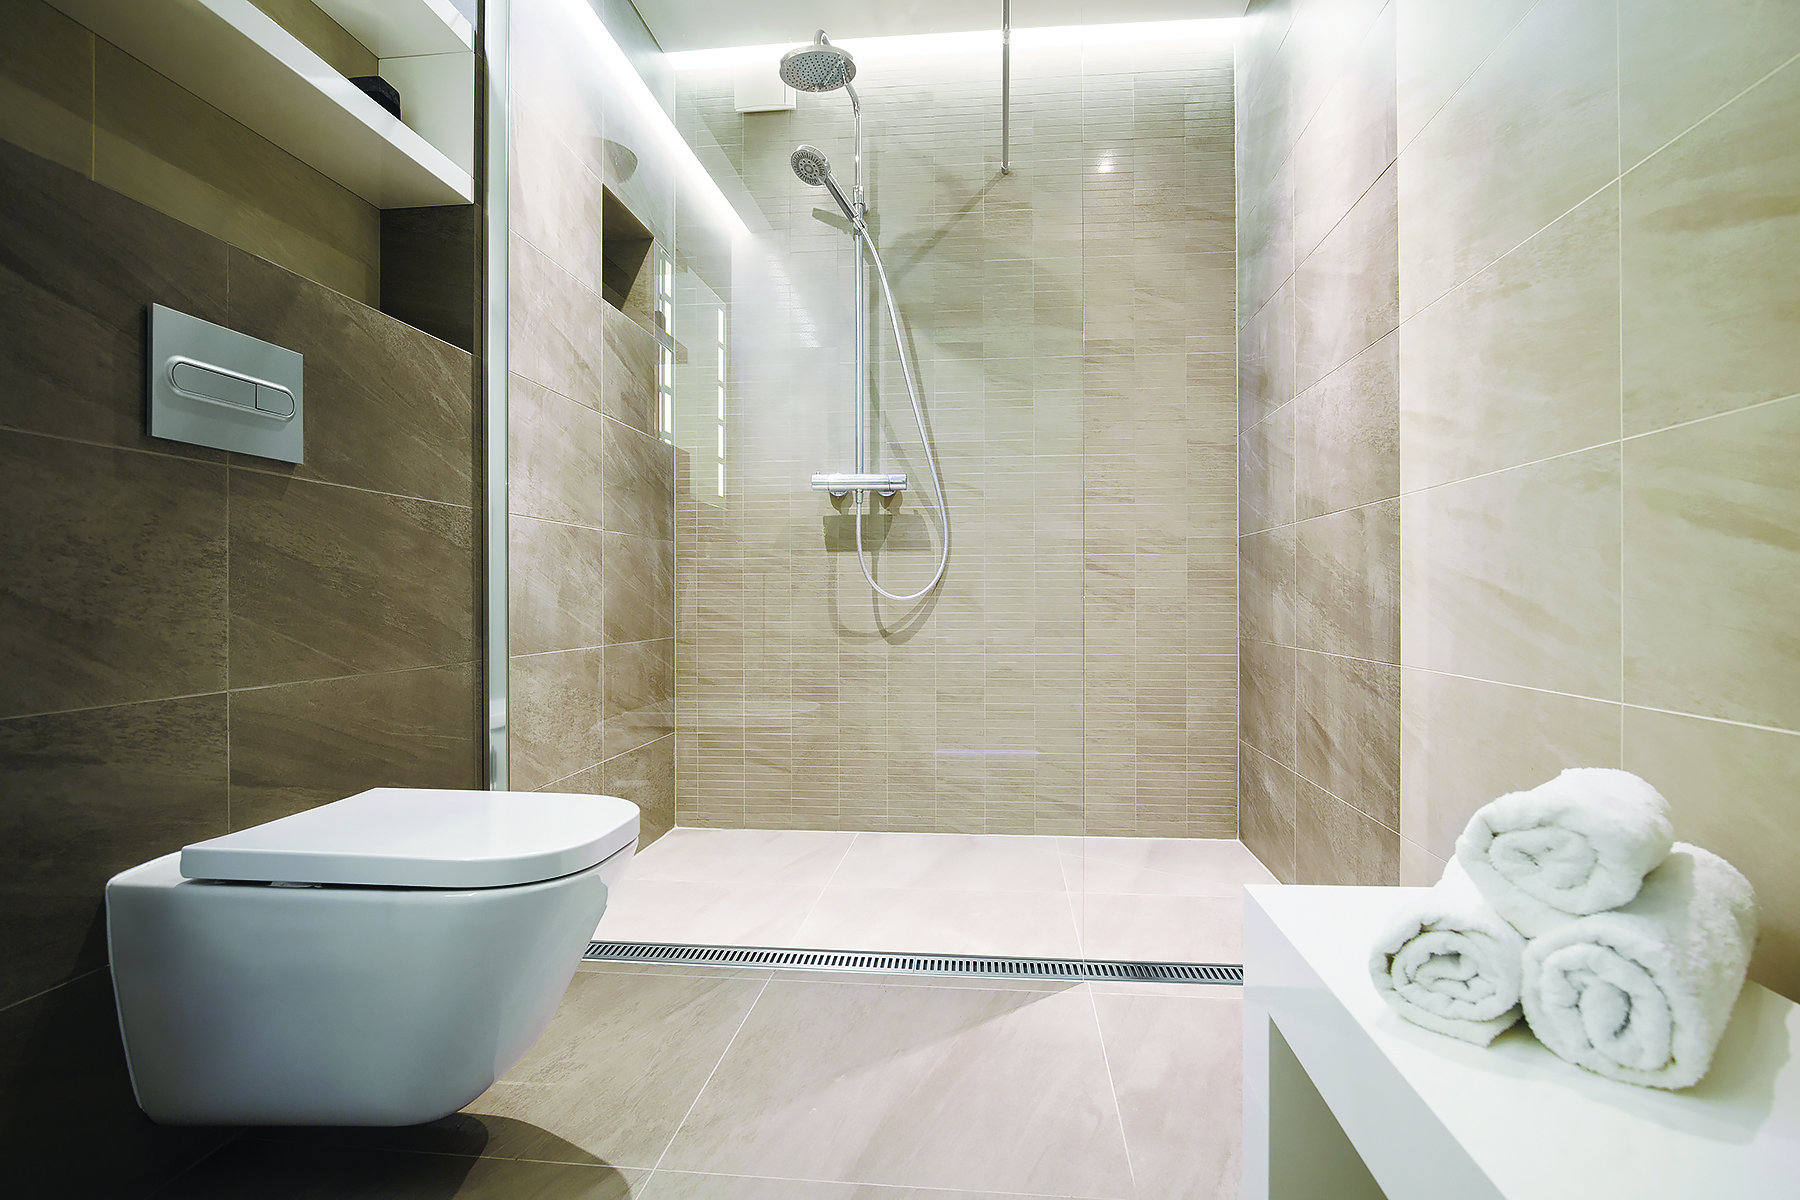 Bathtub-to-shower conversions create increased accessibility for users 